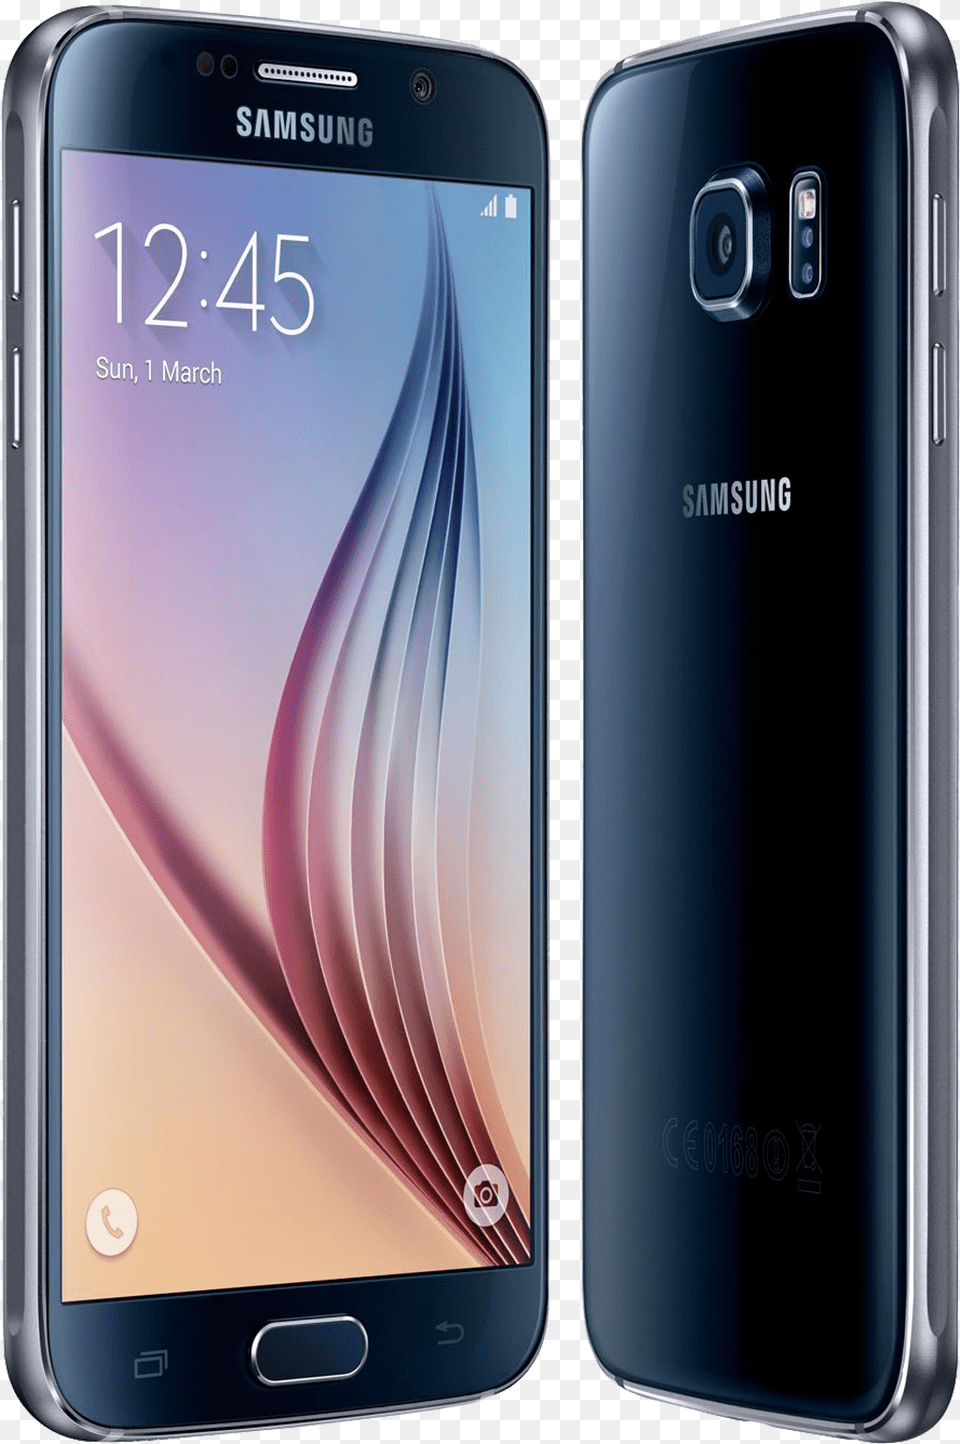 Galaxy S6 Samsung Galaxy S6 Flat, Electronics, Mobile Phone, Phone, Iphone Png Image